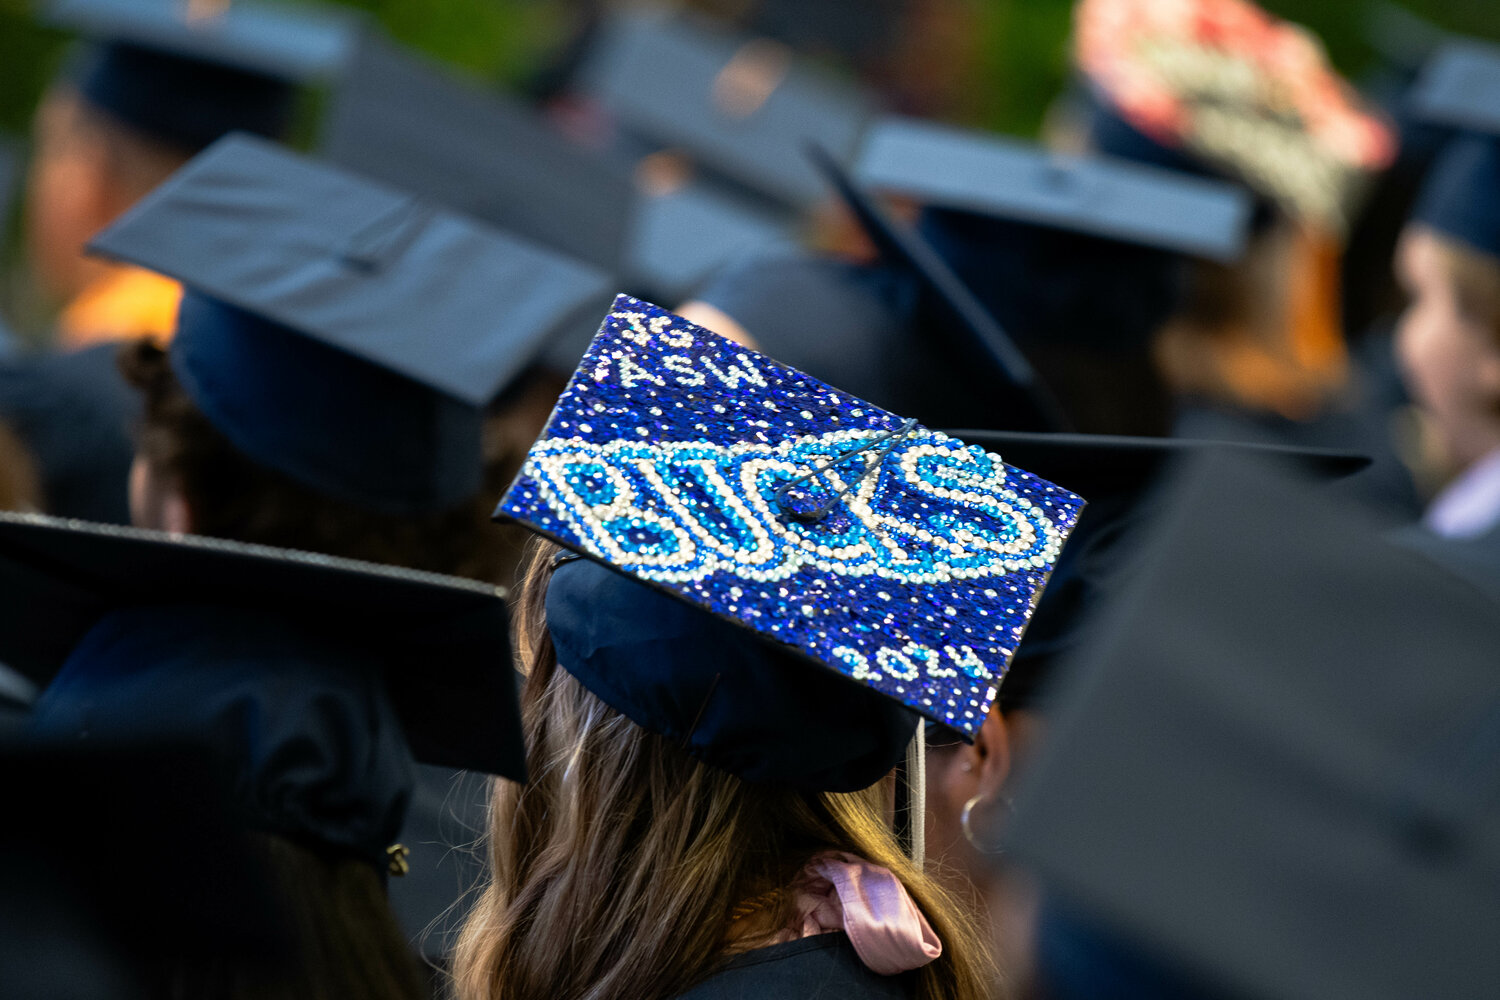 A graduate sports a bedazzled cap at the Bucks County Community College graduation on May 16.